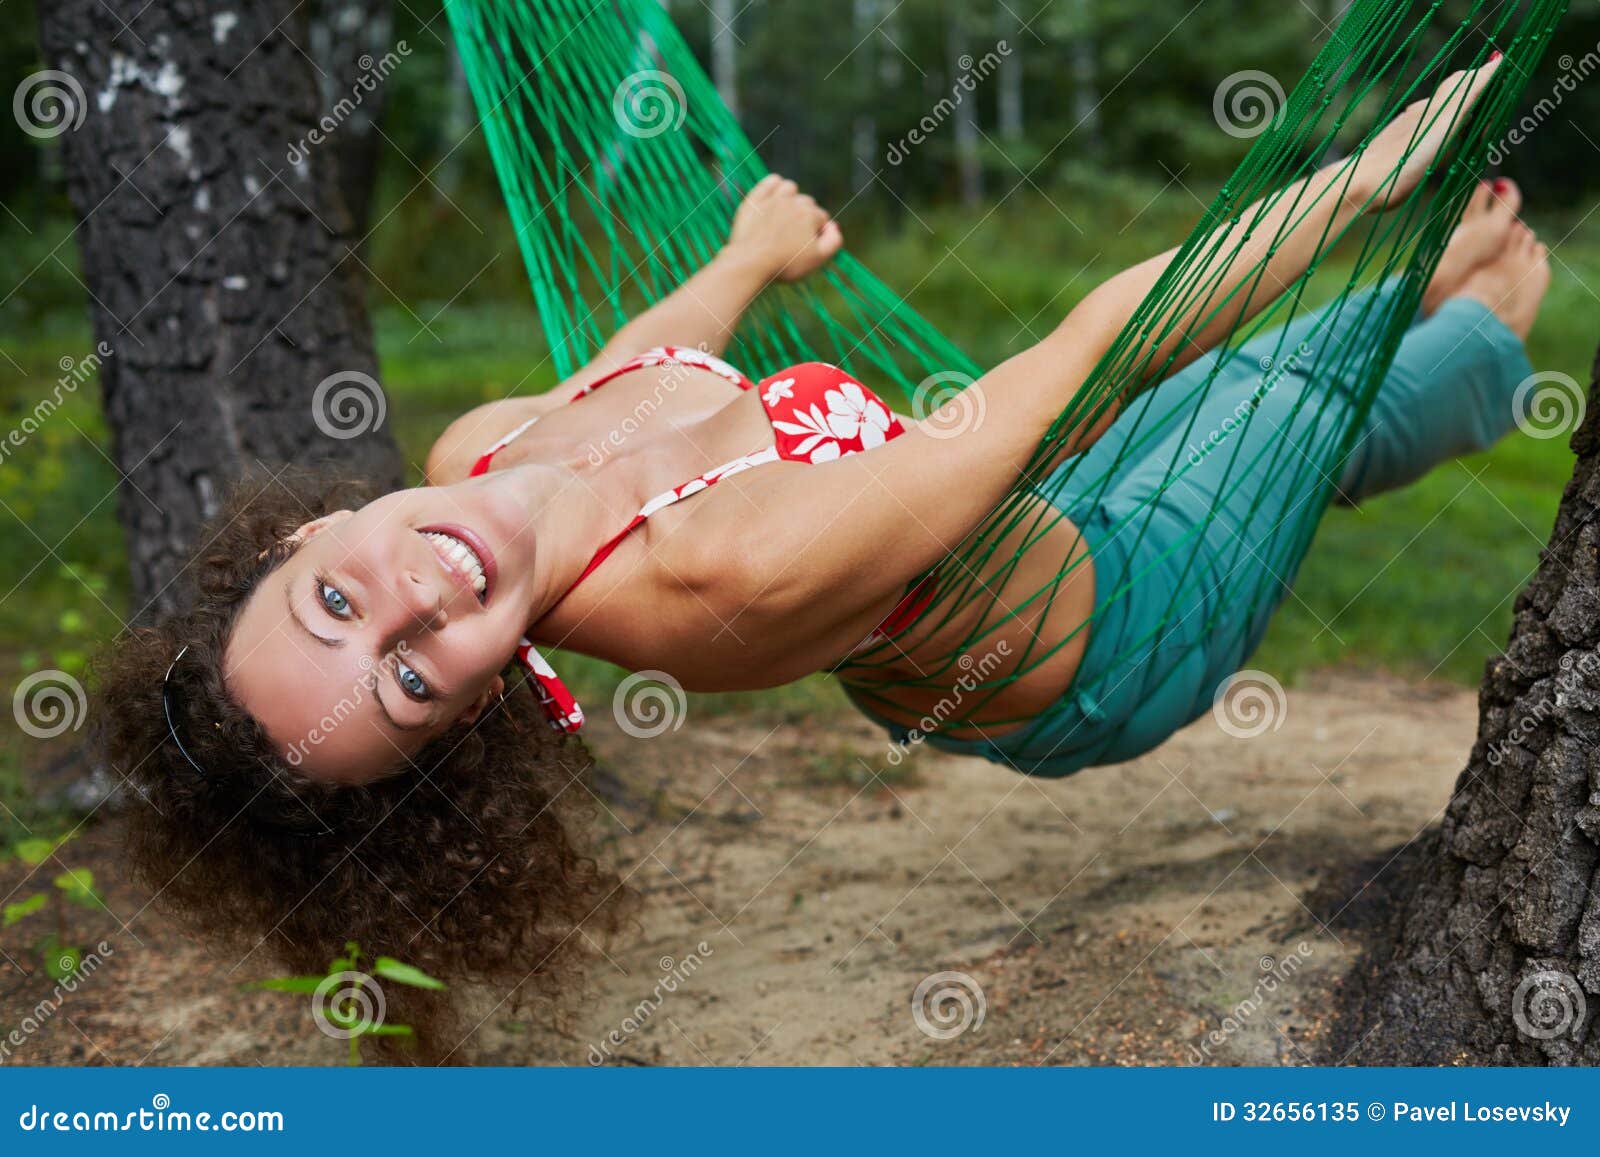 young smiling barefooted woman swing in hammock